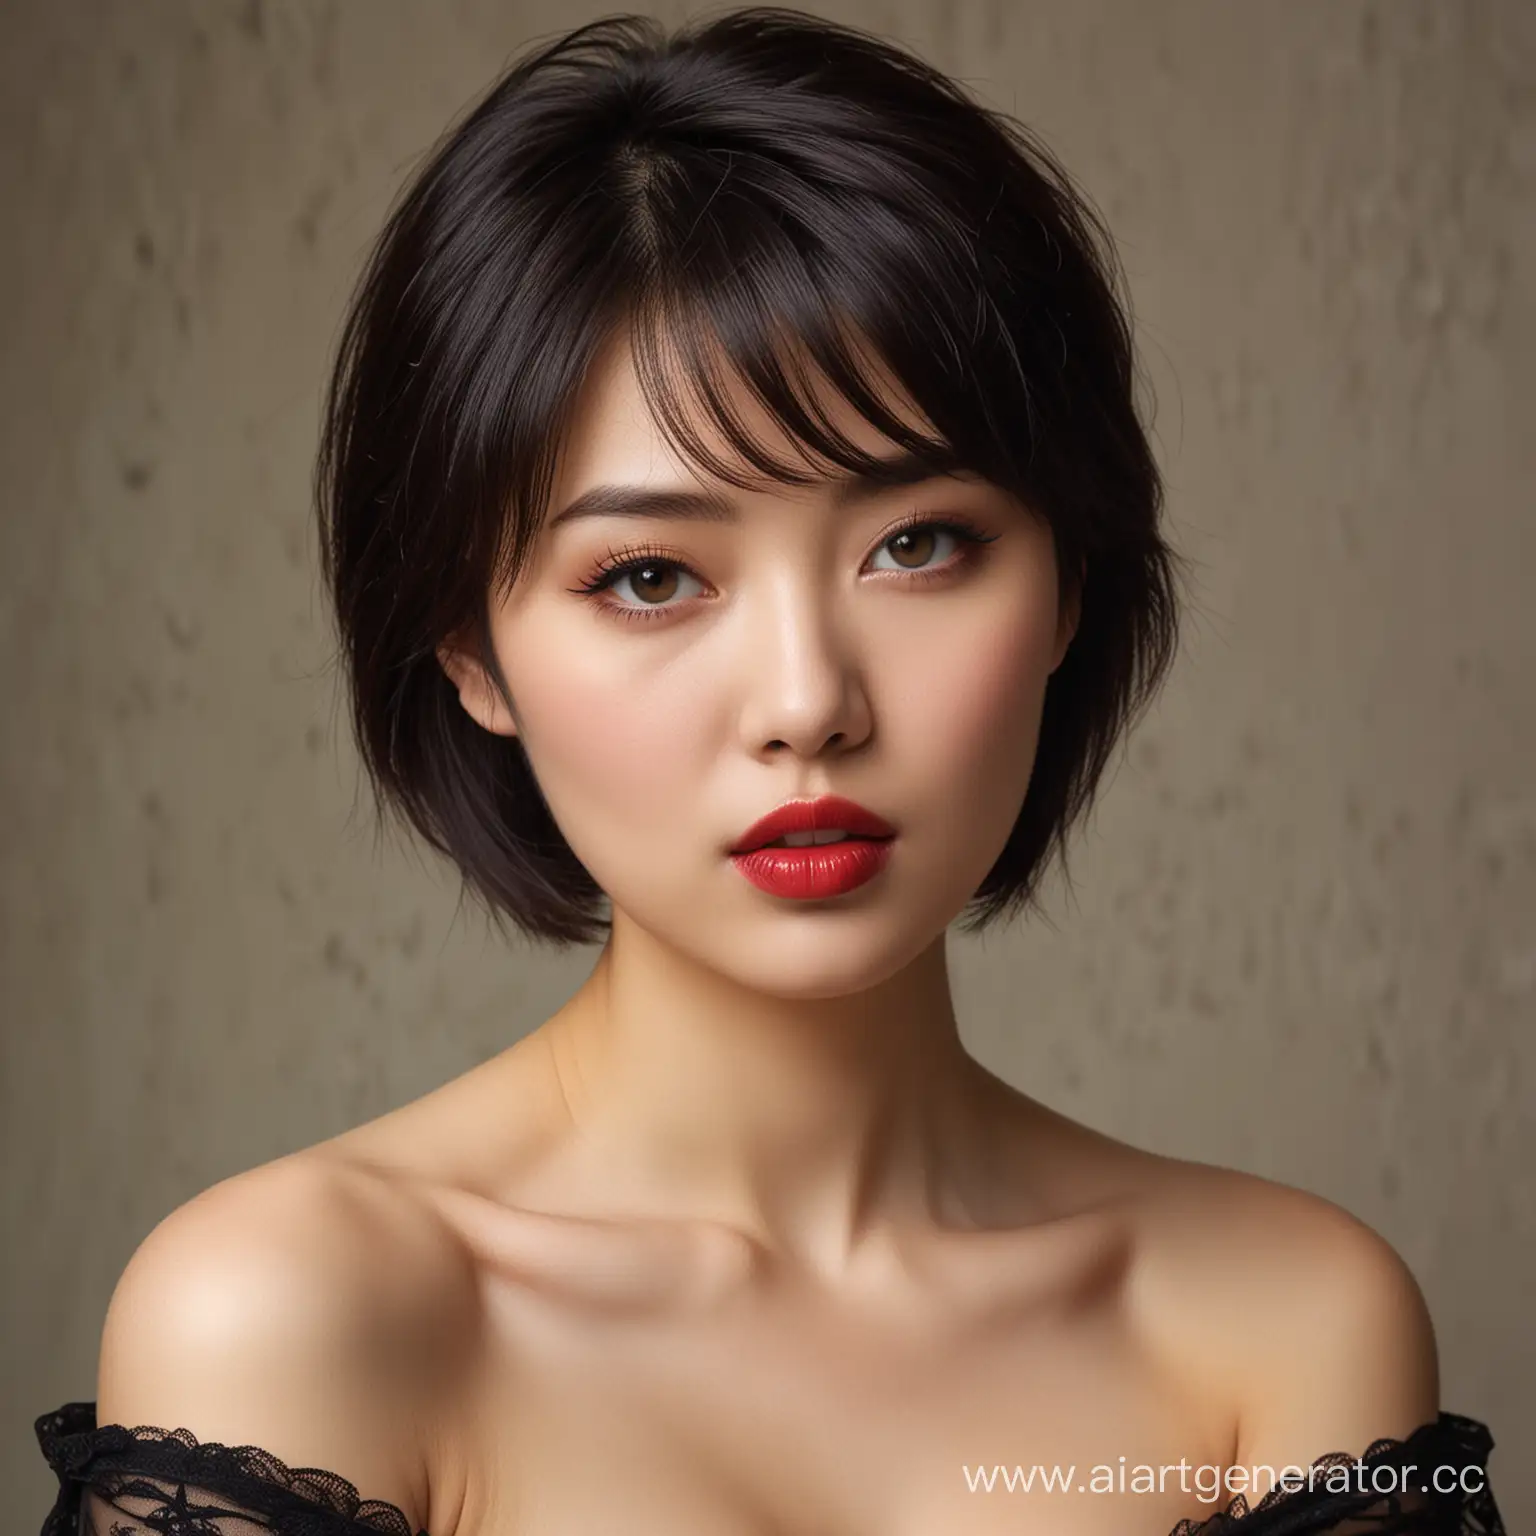 Portrait-of-Elizaveta-Sinitsina-with-Asian-Features-and-Bold-Red-Lips